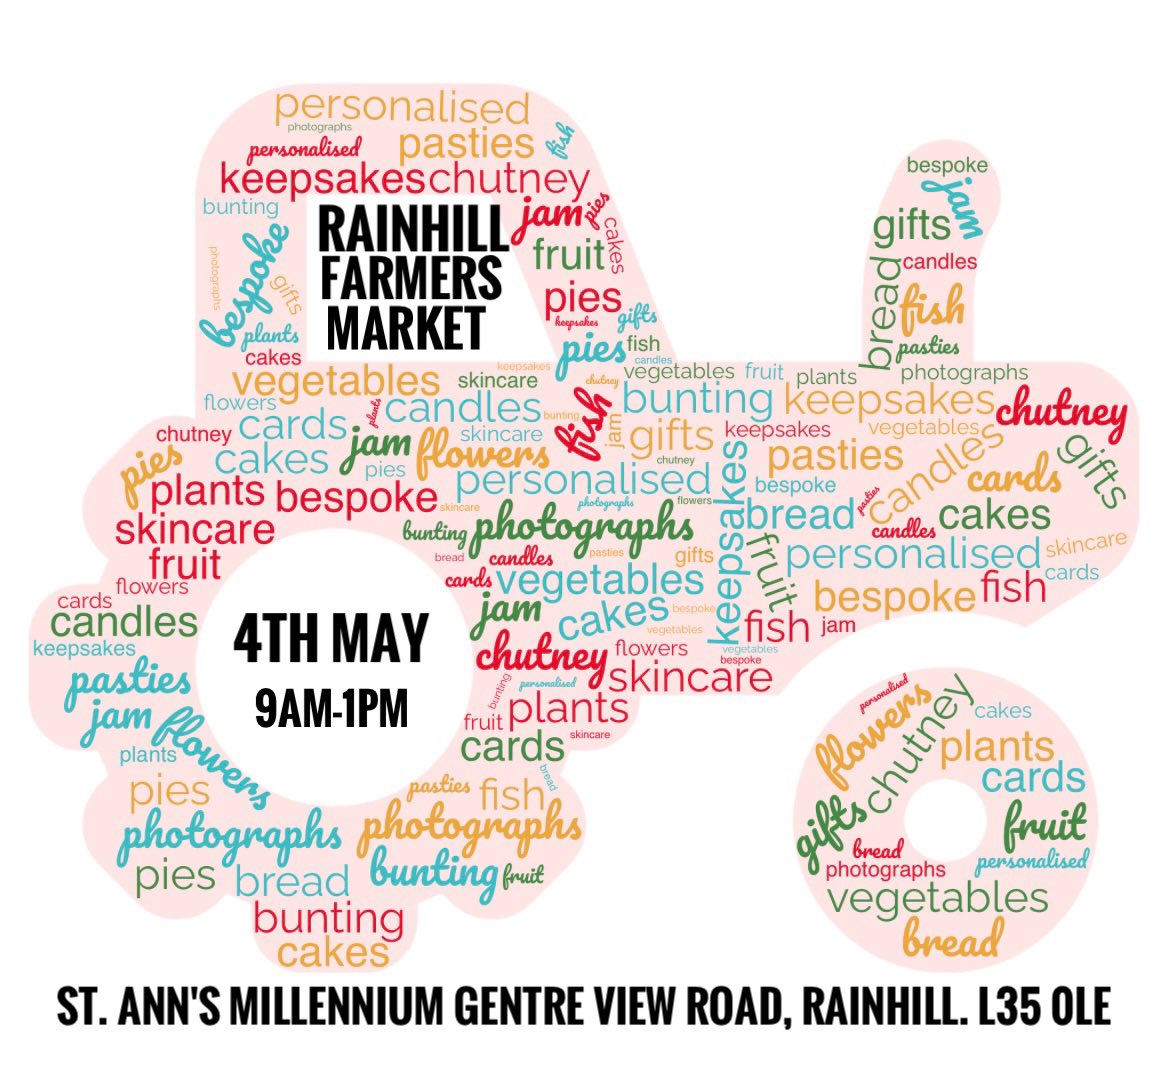 This Saturday 9am-1pm, come and support small, local independent businesses. Your £ can make all the difference. The more people who come the more we grow. #Rainhill #Food #FarmersMarket #Crafts #Gifts